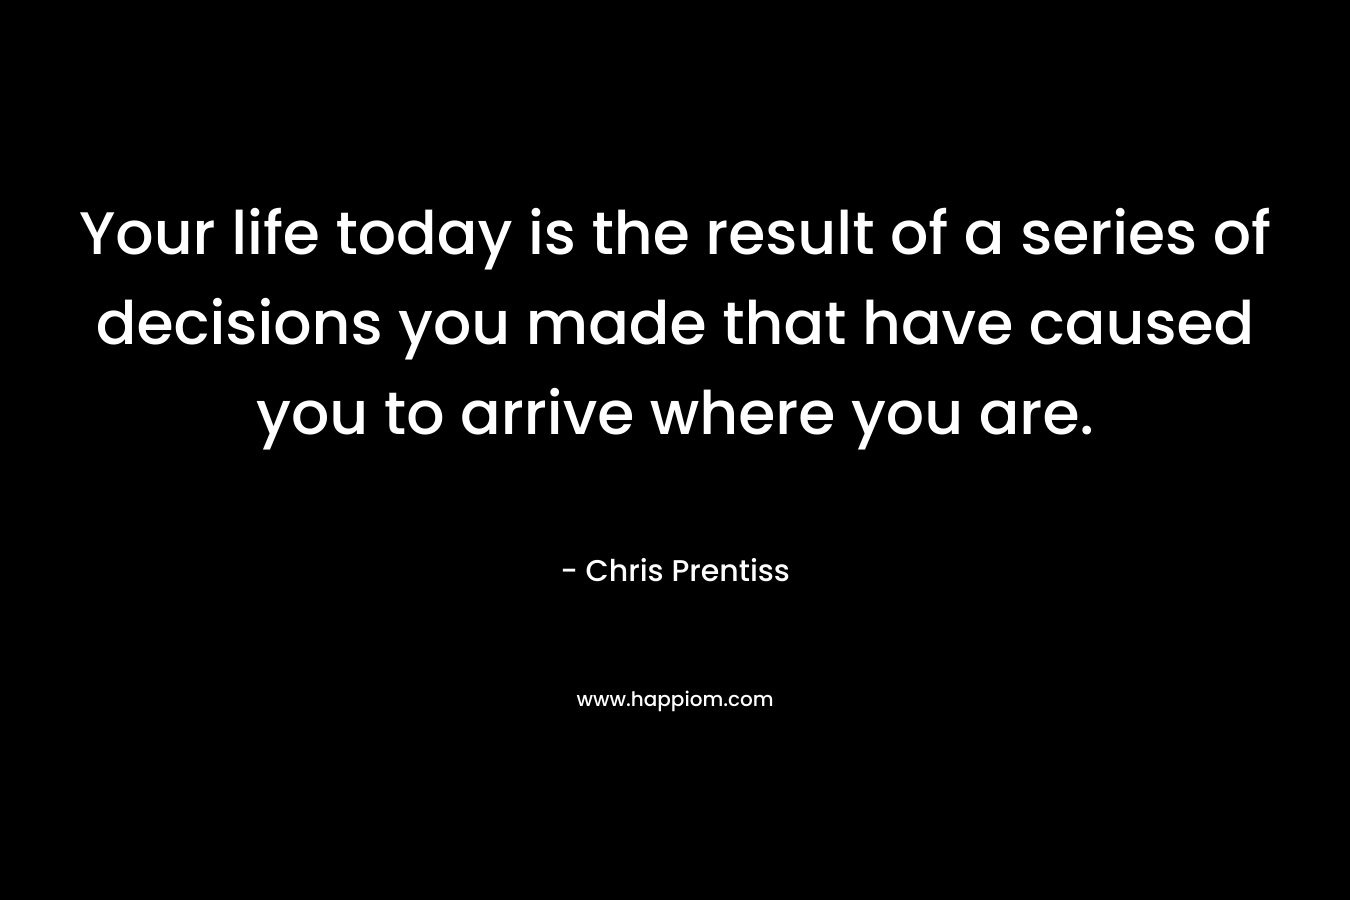 Your life today is the result of a series of decisions you made that have caused you to arrive where you are. – Chris Prentiss